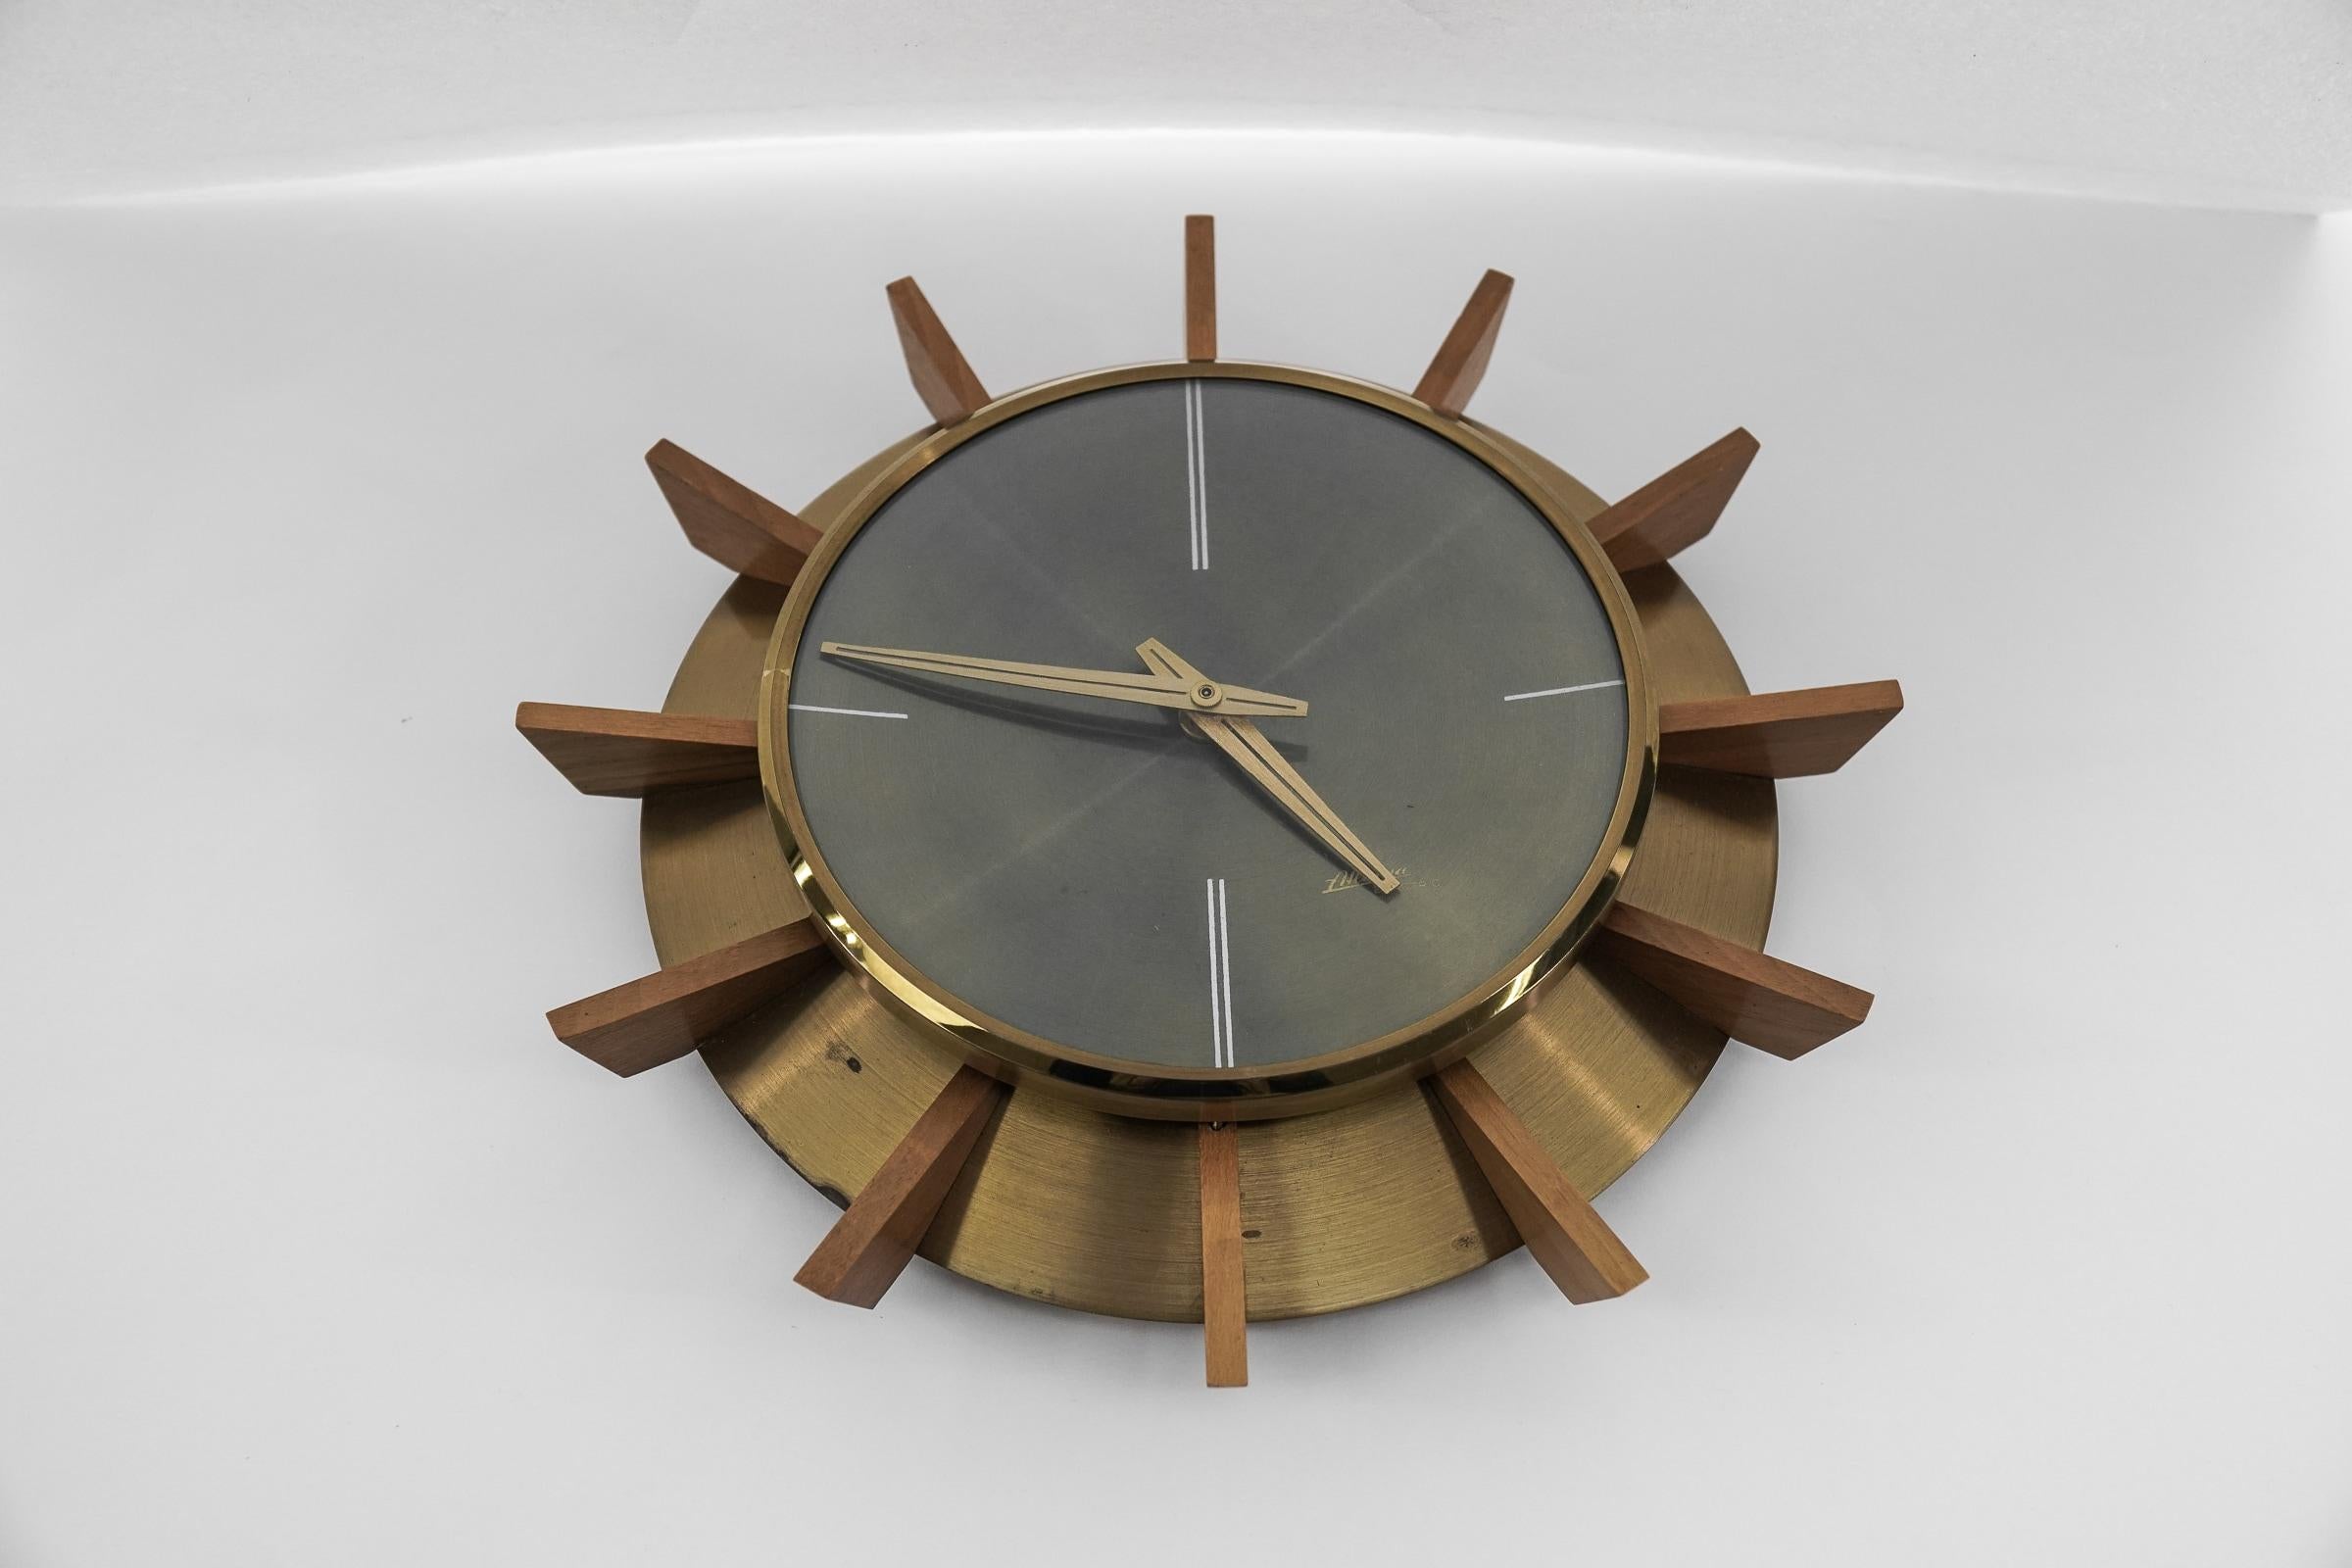 Stunning wall clock made of metal, brass, wood & glass. 

An eye catcher par excellence.

Made in Germany.

We have tested it and it works.

Electric, battery operated clock.